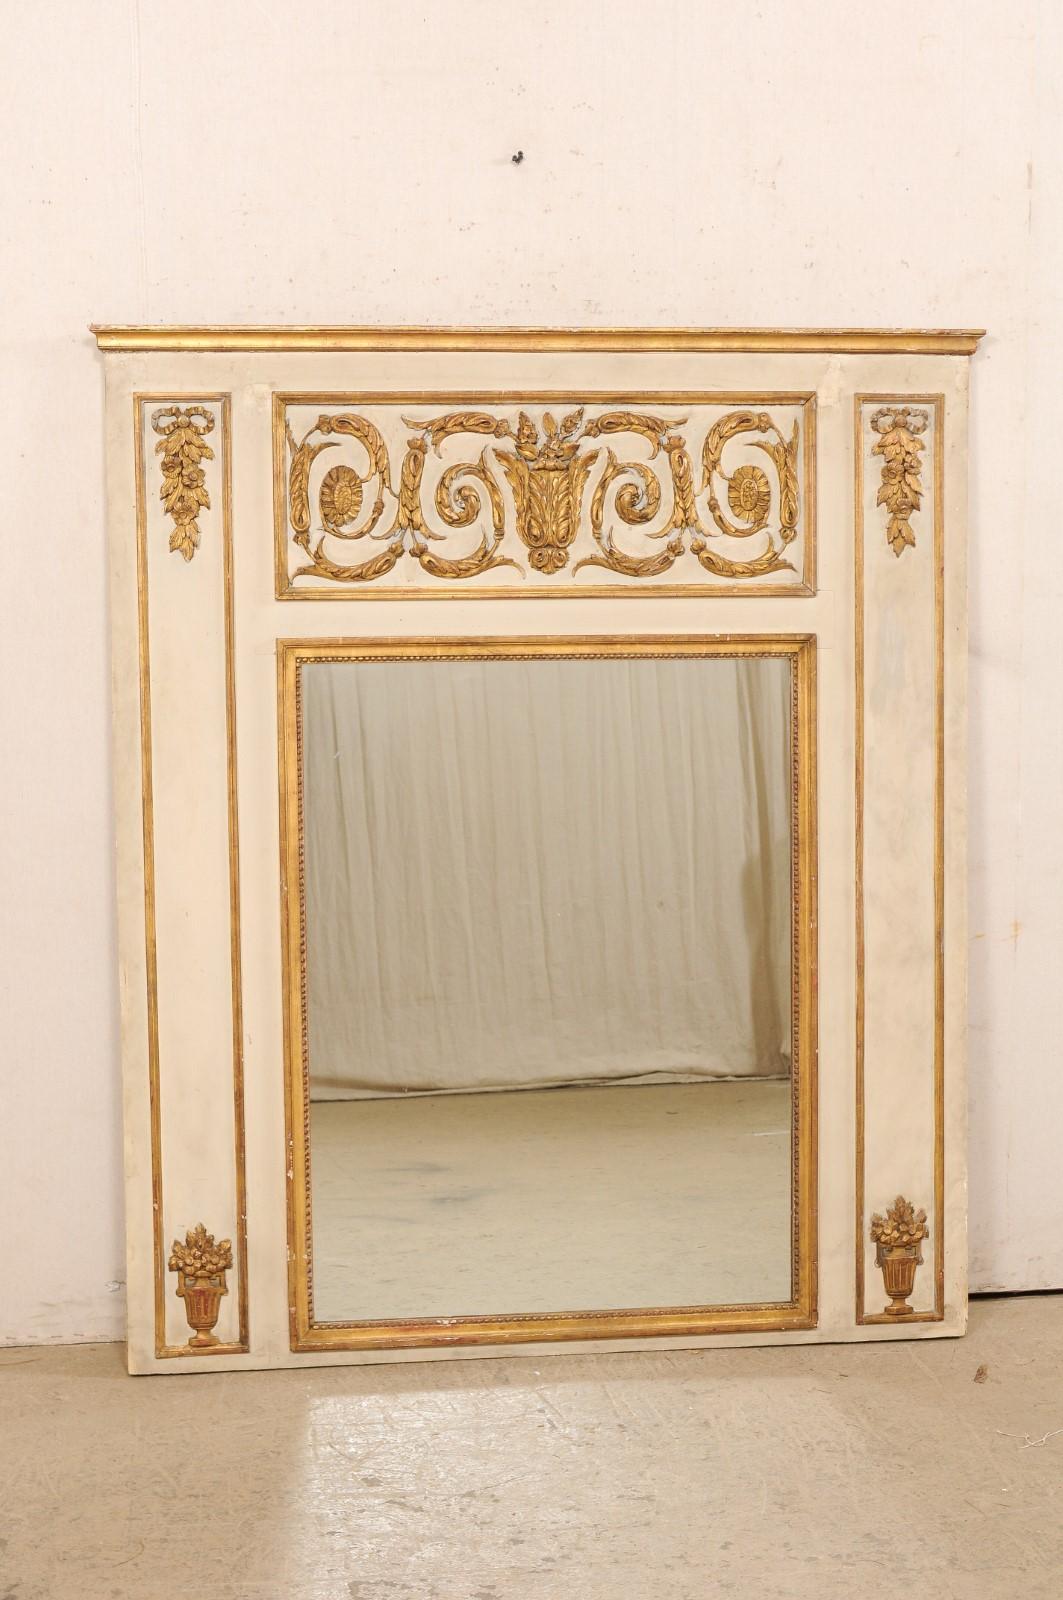 A French large-sized neoclassic mirror from the 19th century. This antique mirror from France is beautifully embellished with traditional Neoclassical carved elements including scrolling foliage, bow-tie topped hanging garlands, and urns with floral